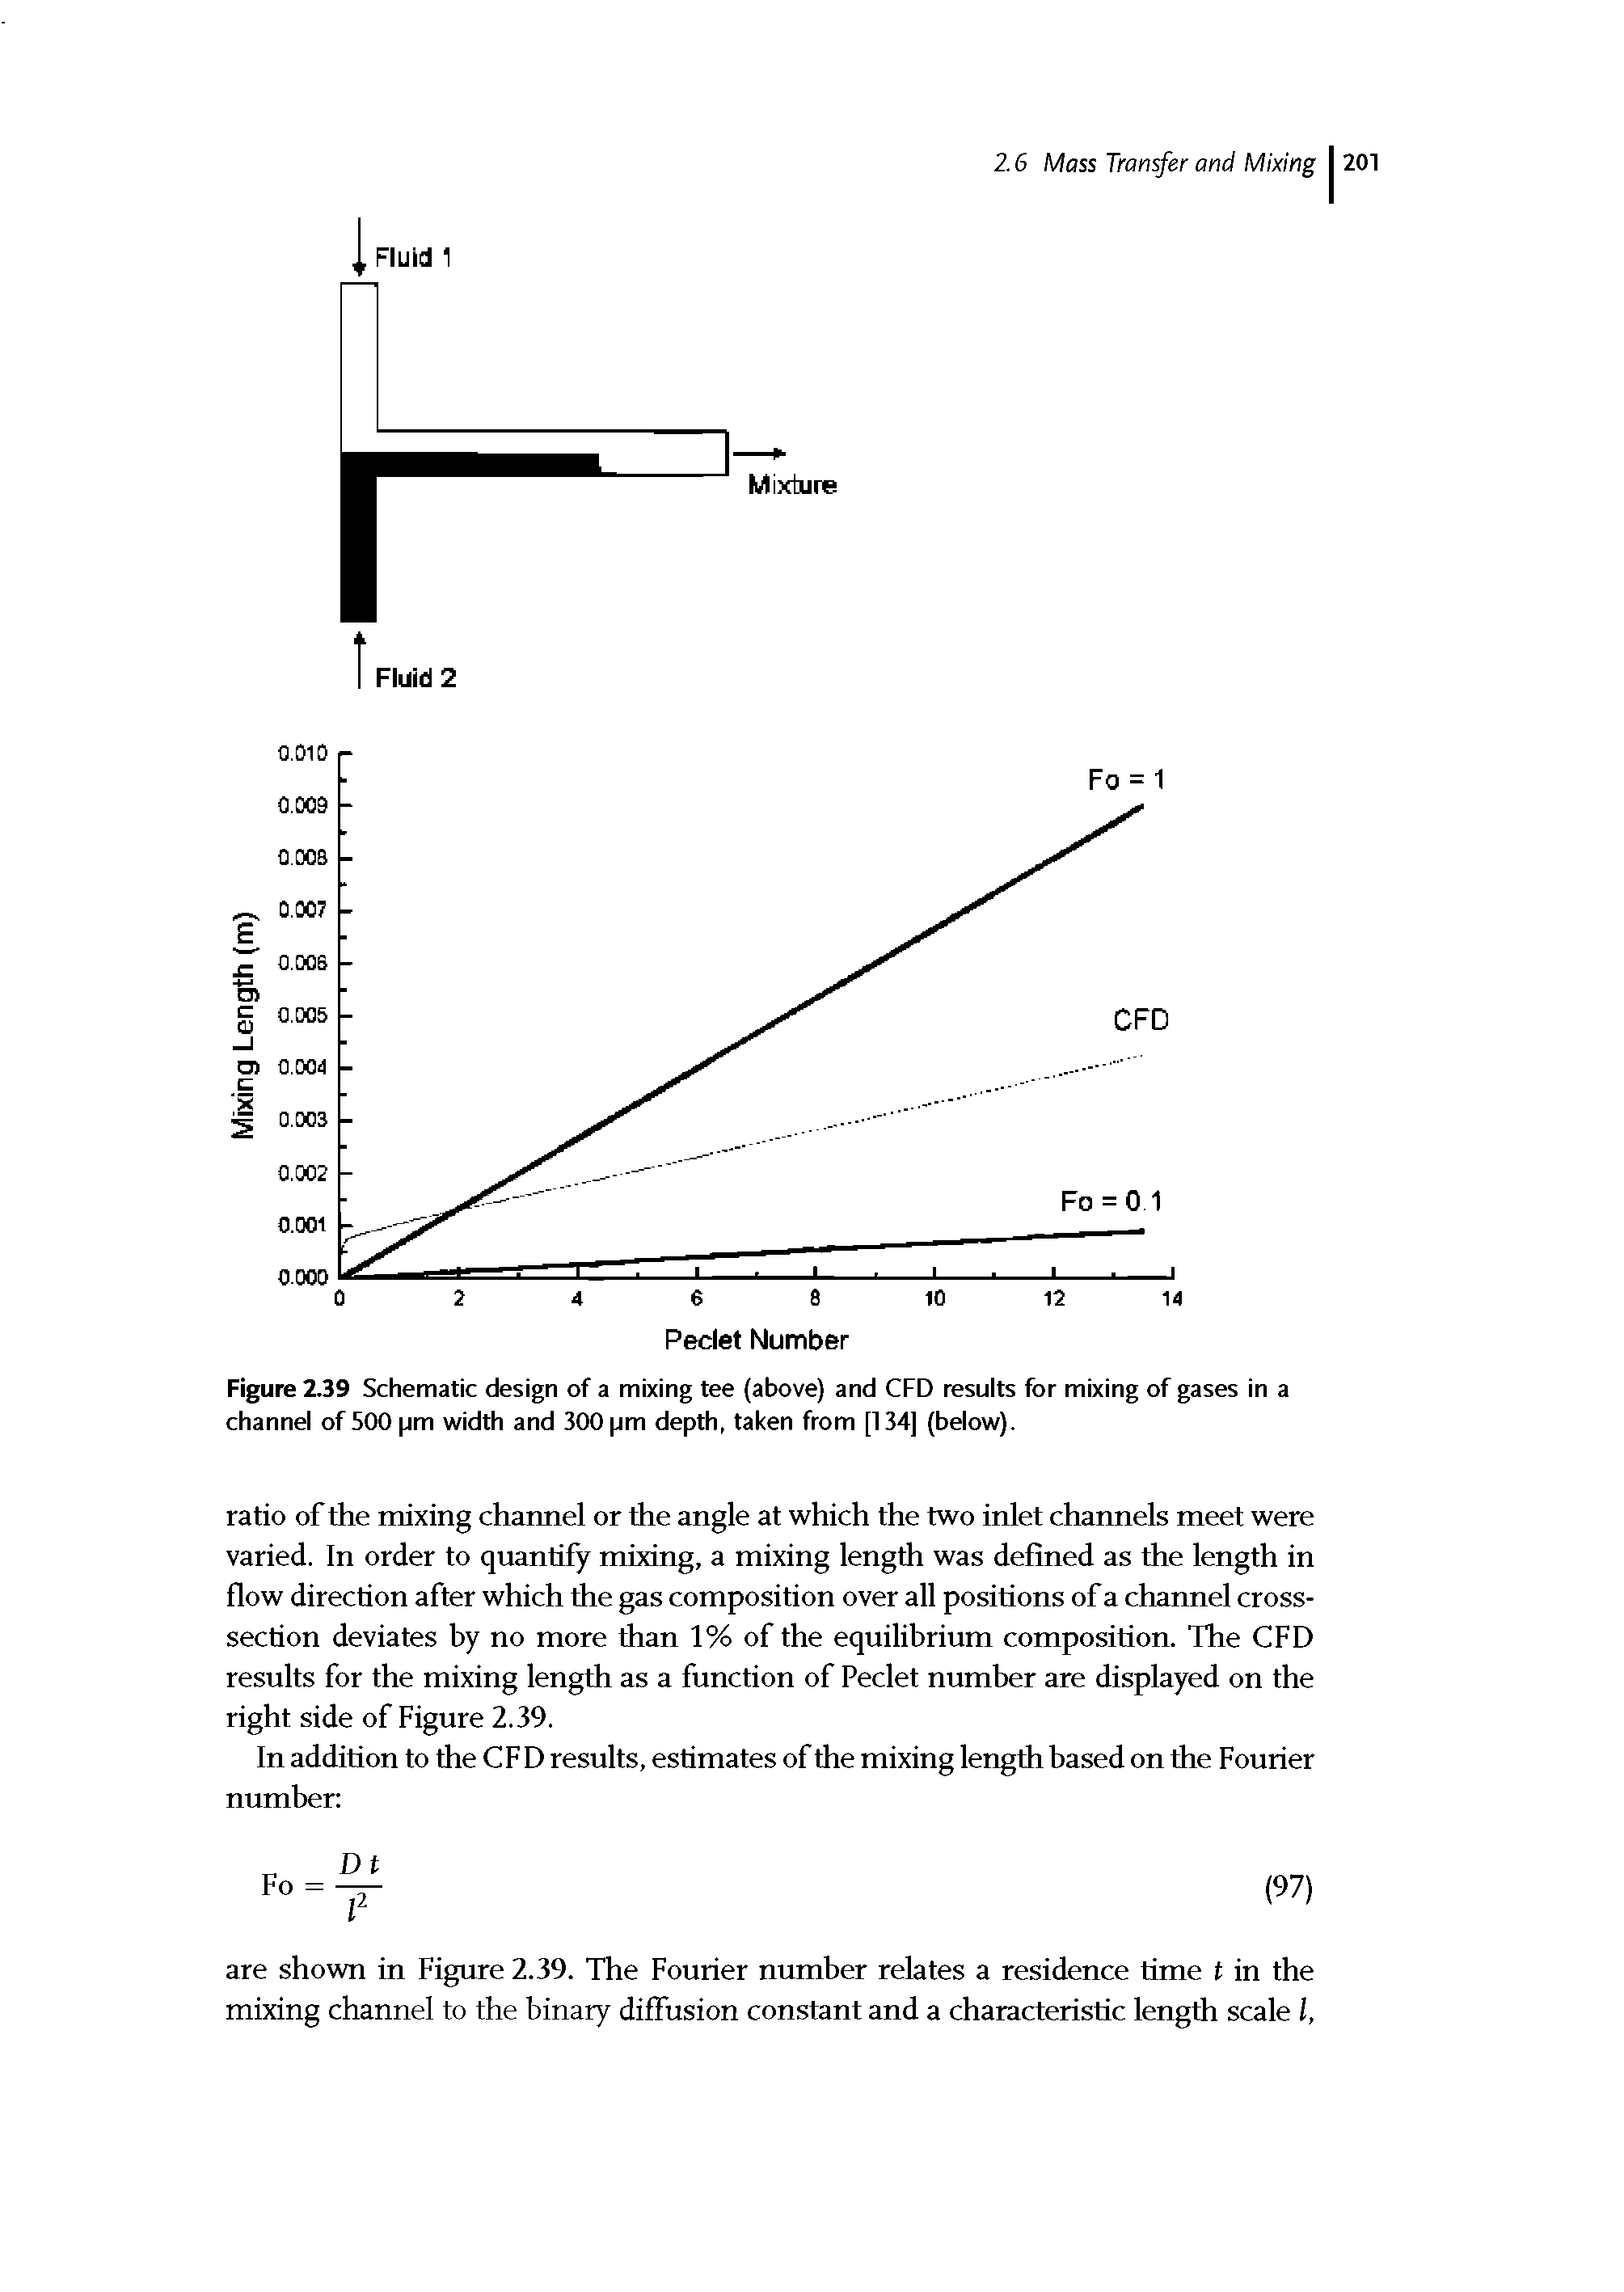 Figure 2.39 Schematic design of a mixing tee (above) and CFD results for mixing of gases in a channel of500 jm width and 300 jm depth, taken from [134] (below).